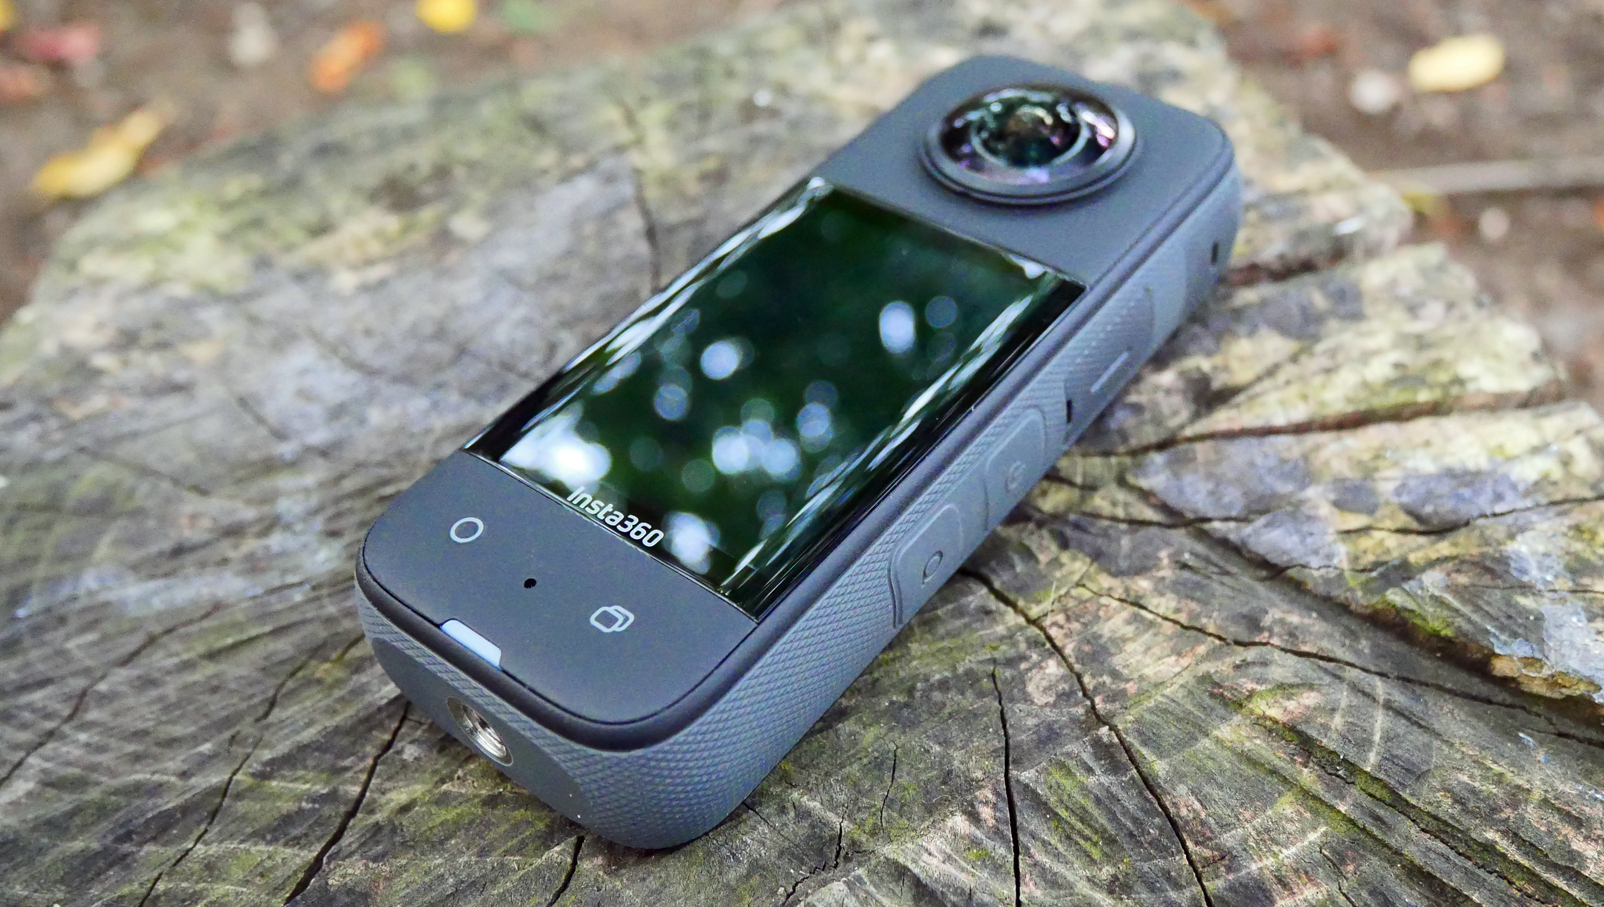 Insta360 X3 action camera review – 360 video so you don't miss any